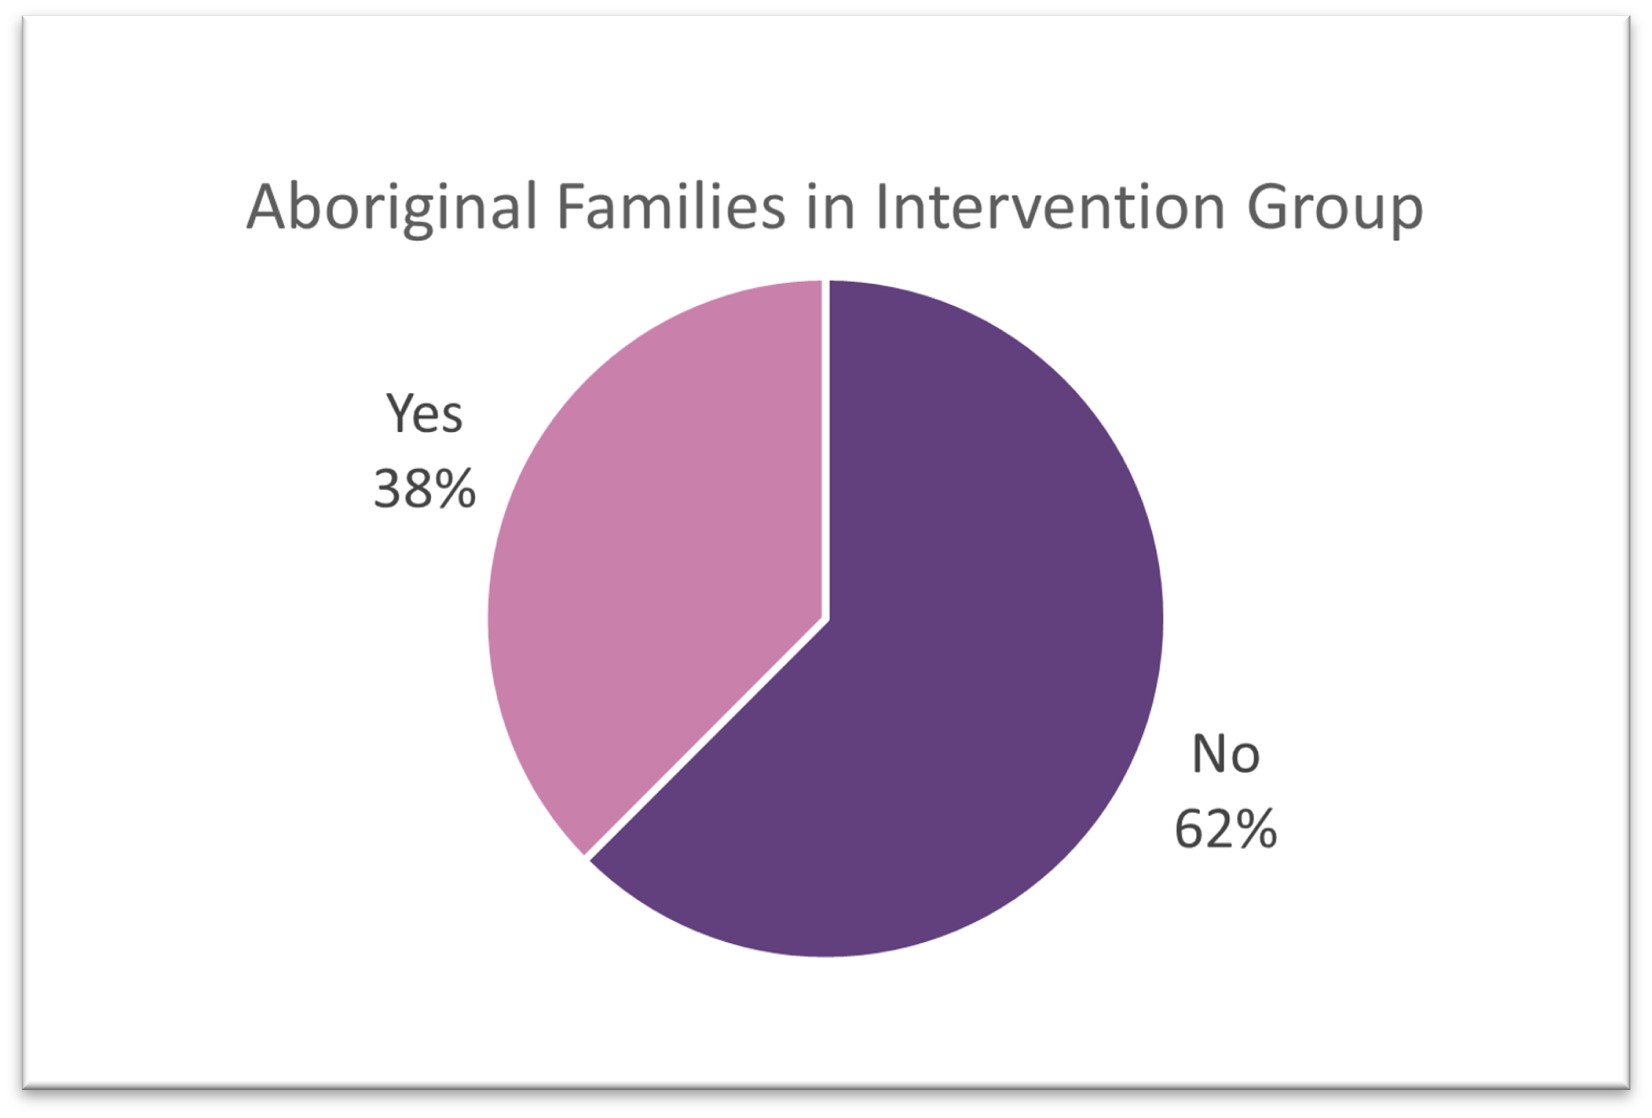 Pie graph showing 38 per cent of families in the intervention group identifying as Aboriginal and/or Torres Strait Islander.